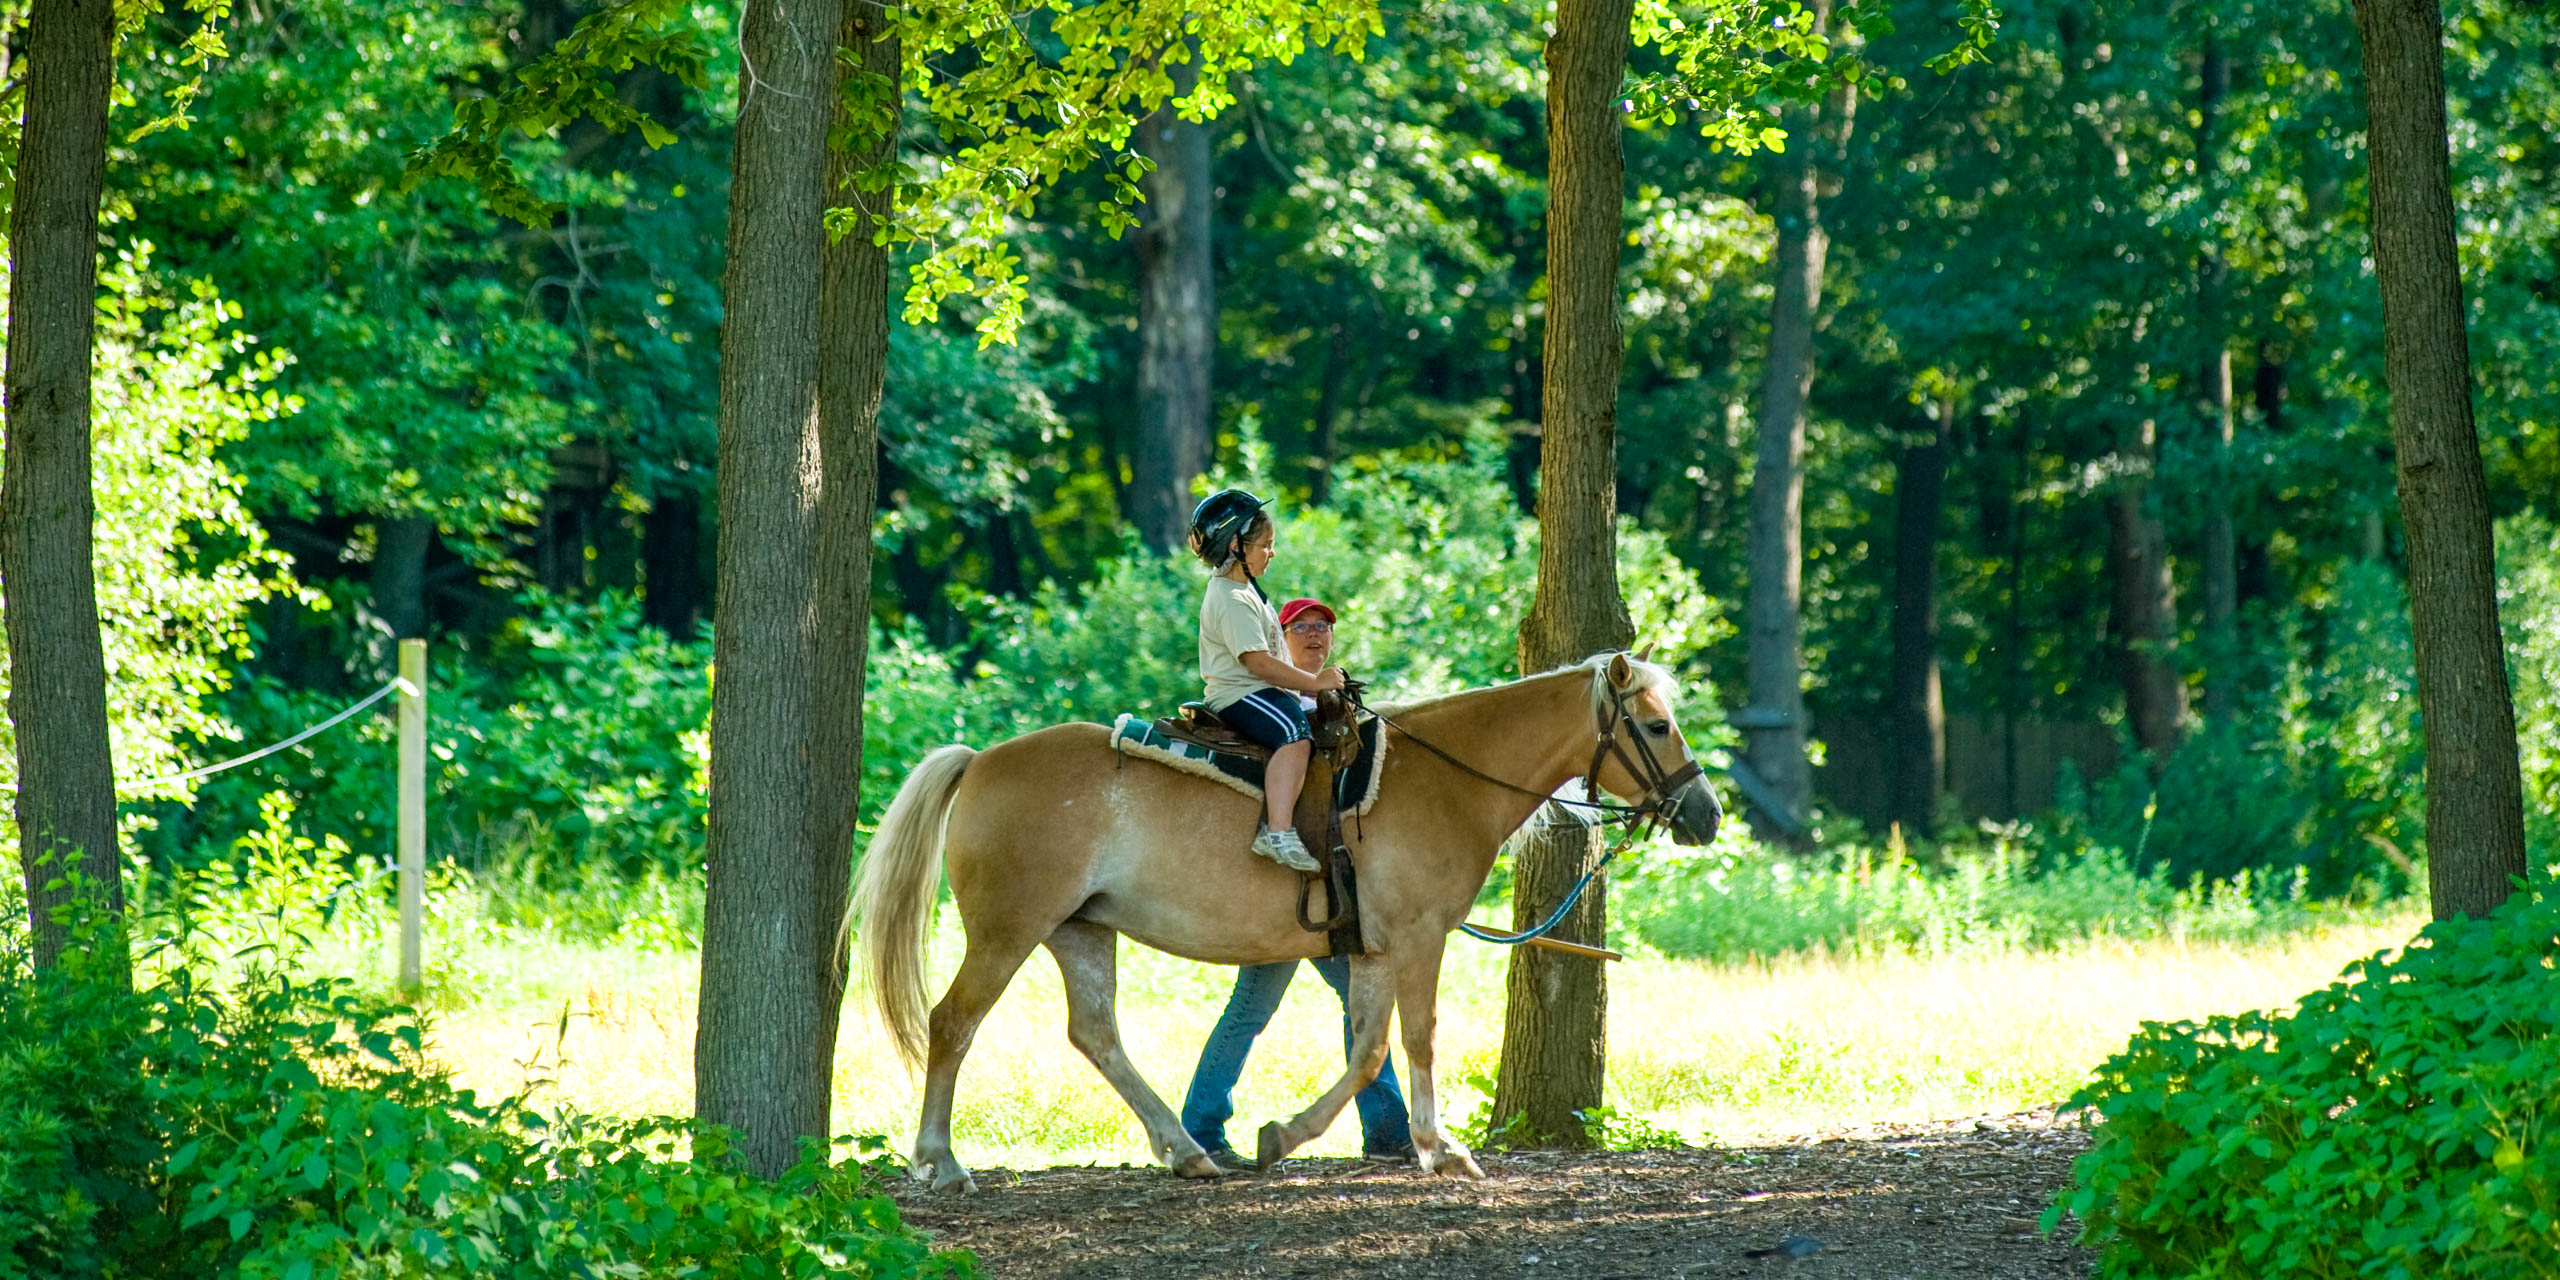 Camper riding a horse in the woods.